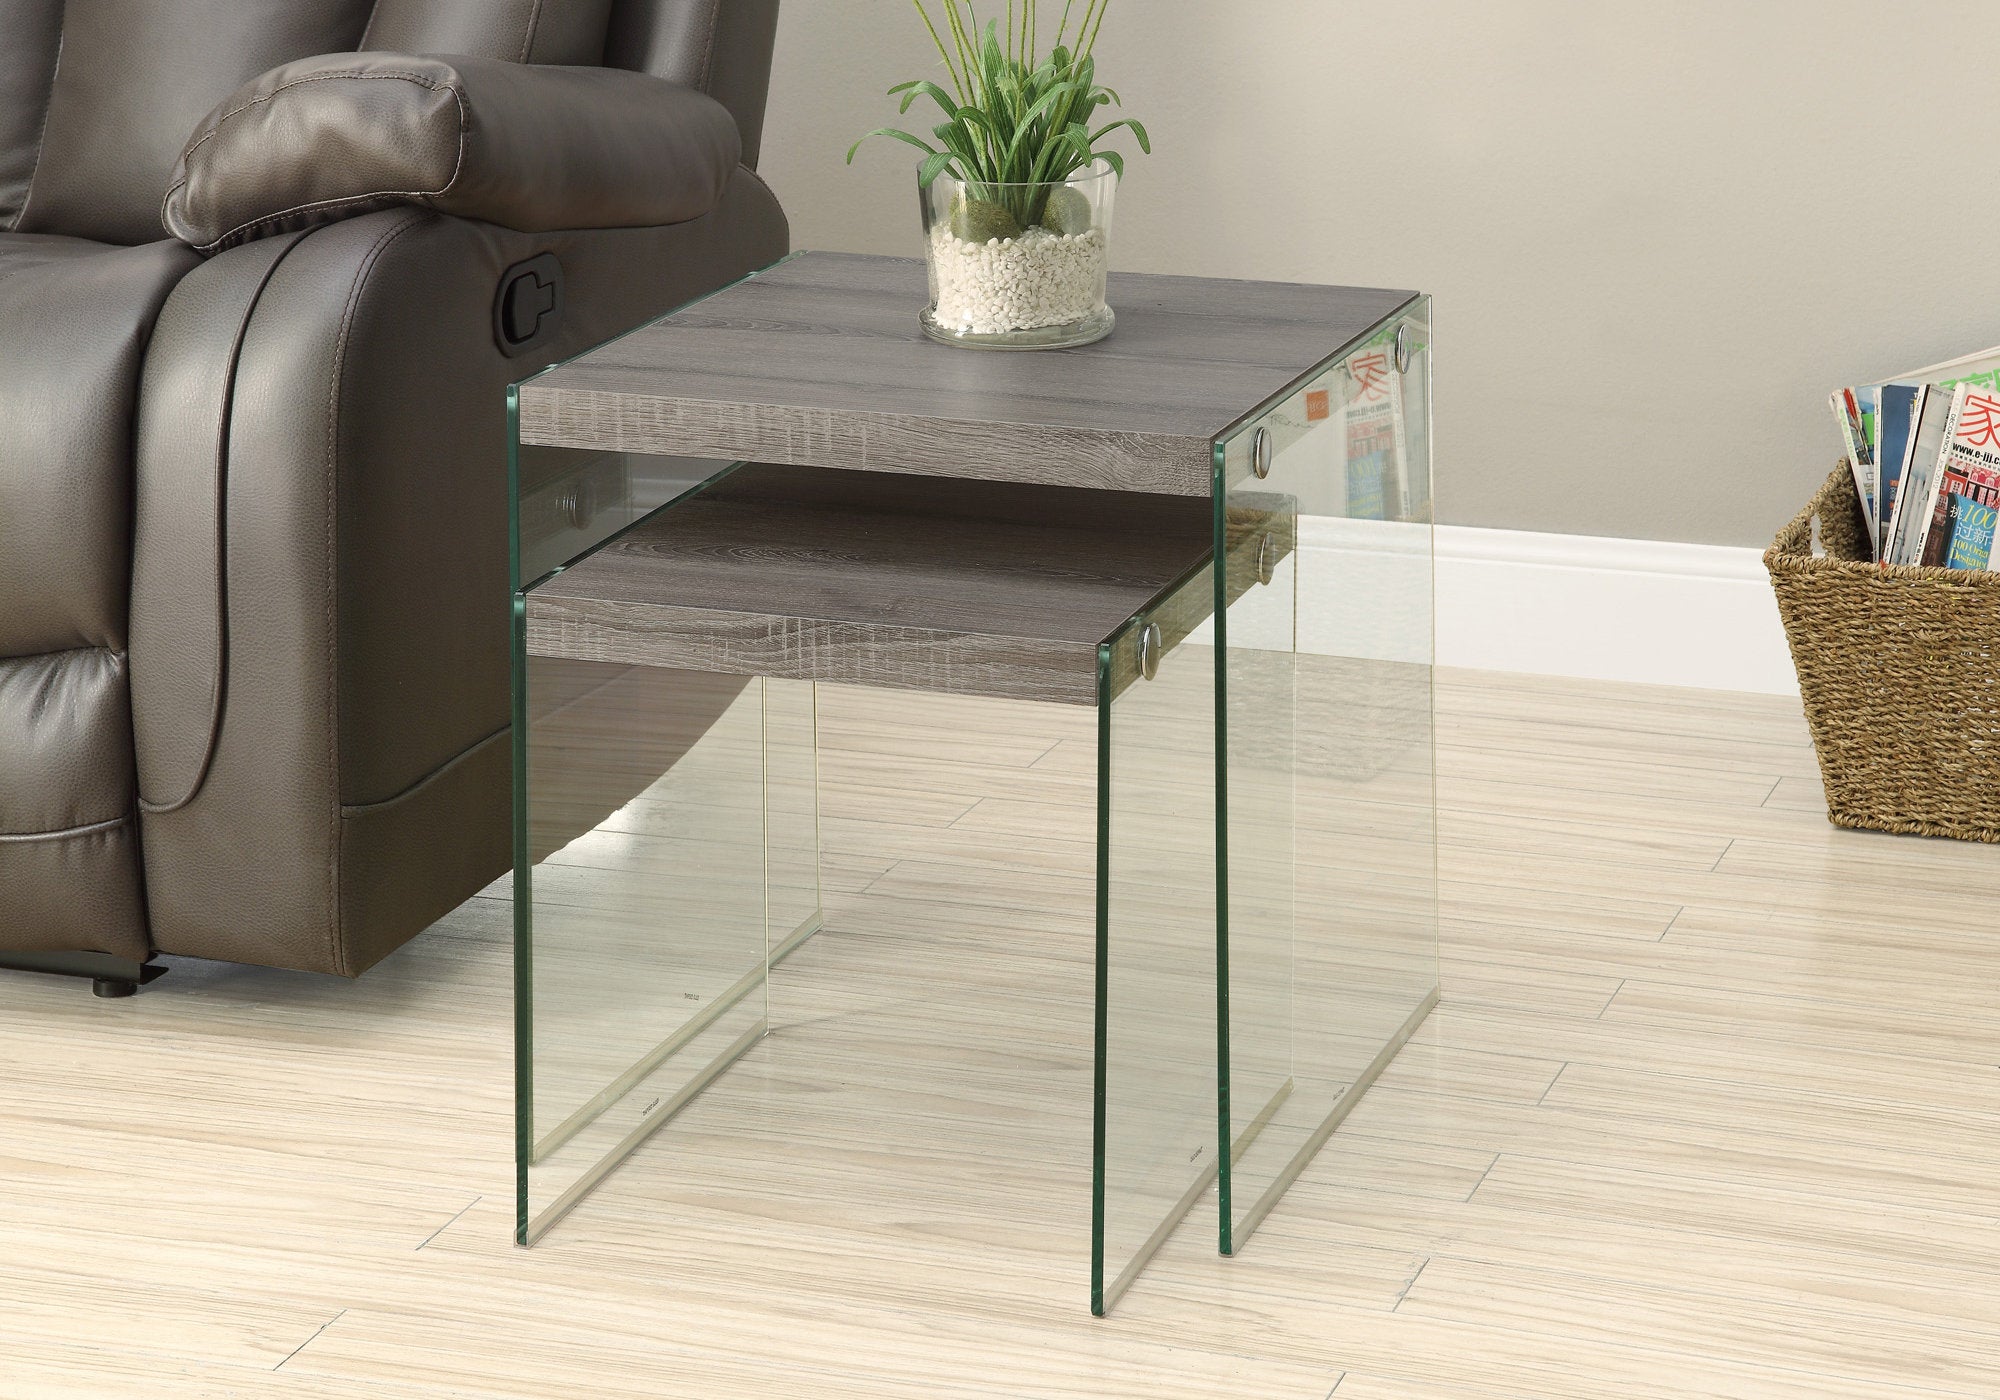 MN-933053    Nesting Table, Set Of 2, Side, End, Tempered Glass, Accent, Living Room, Bedroom, Tempered Glass, Laminate, Dark Taupe, Clear, Contemporary, Modern